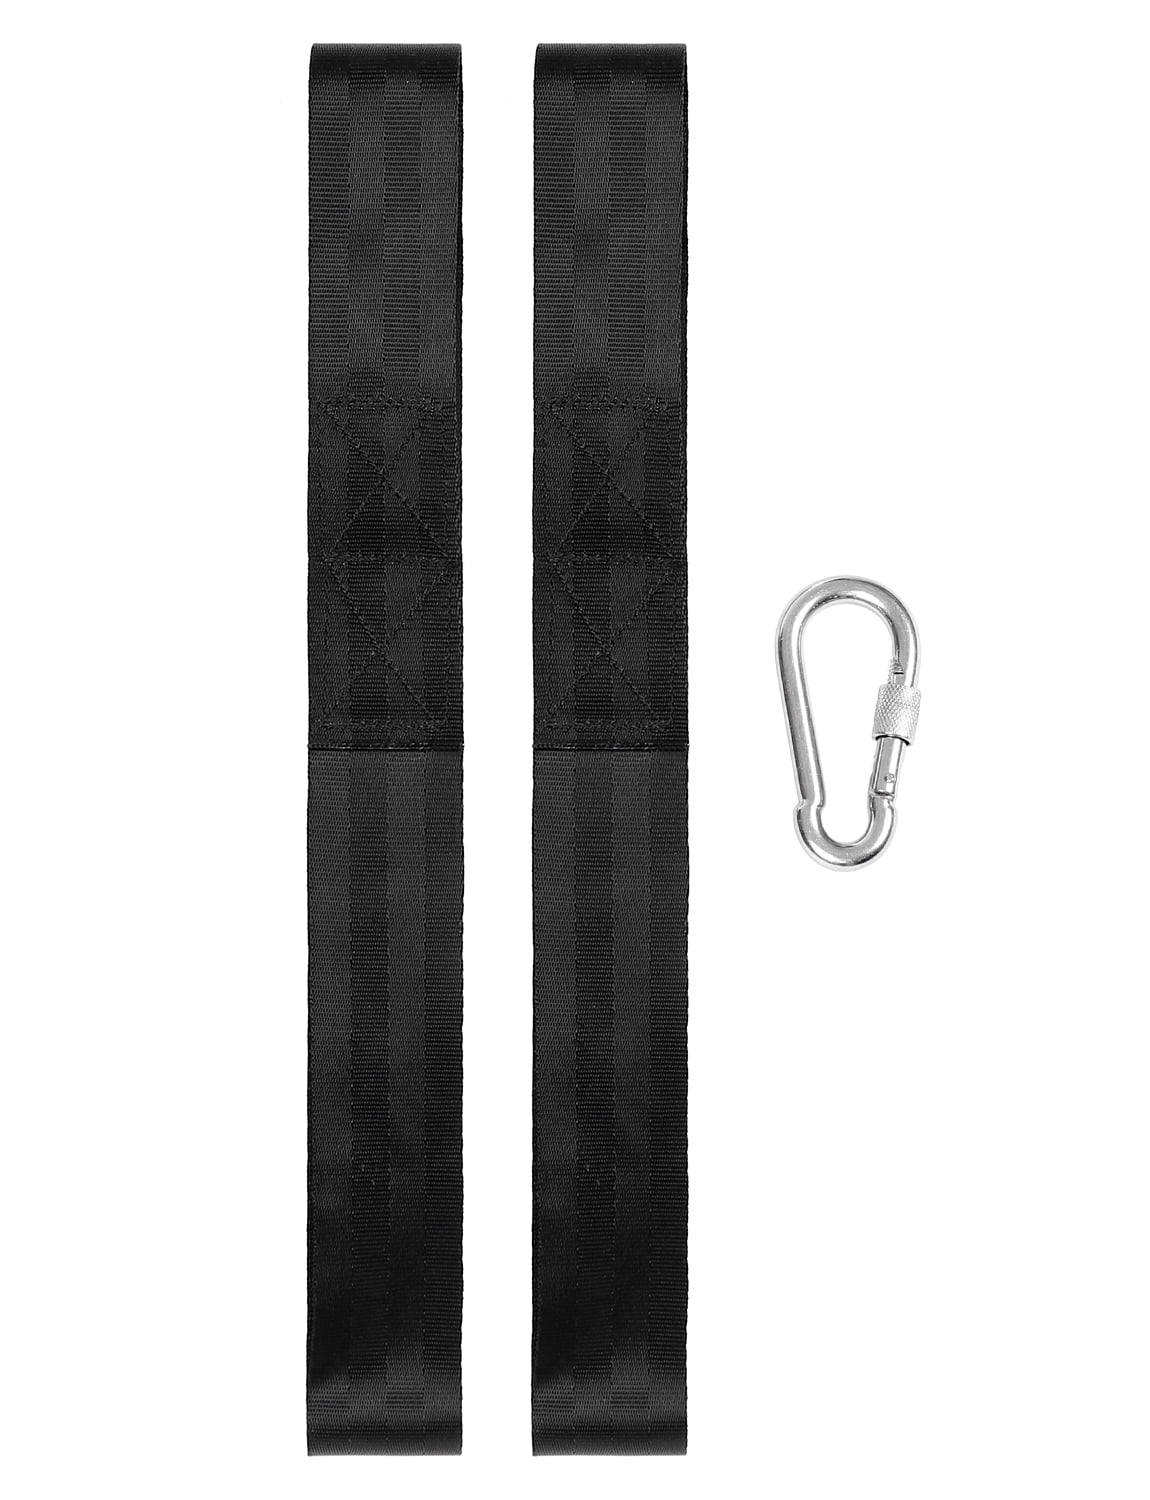 Details about   Kit Anchor Strap For Battle Rope Undulation Training Workout 2 pack